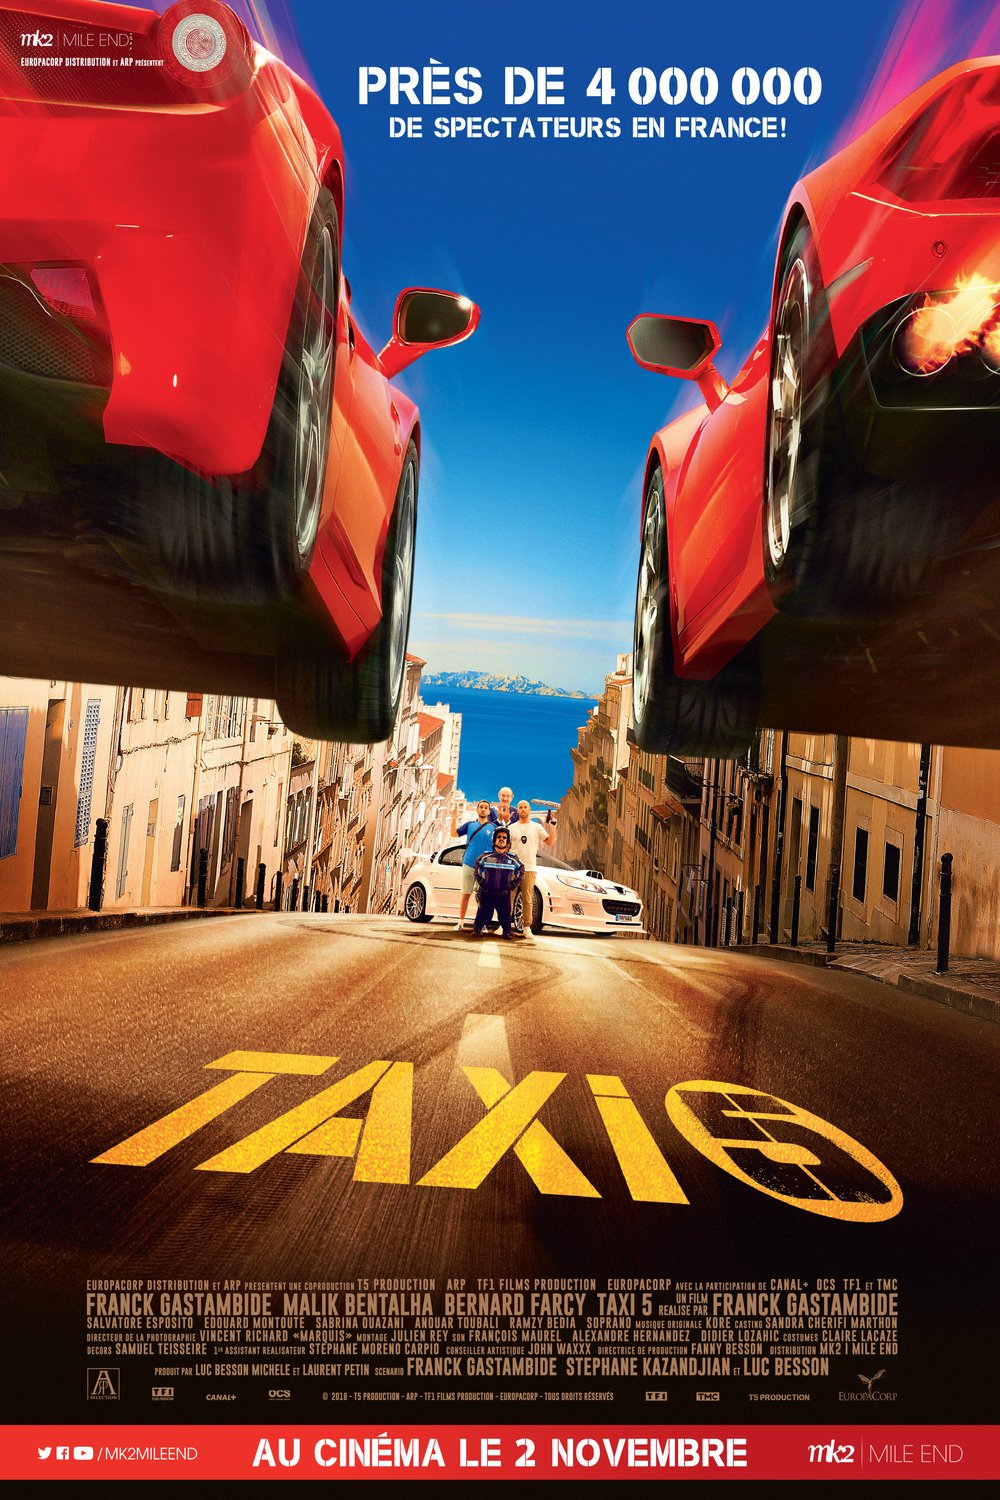 Poster of the movie Taxi 5